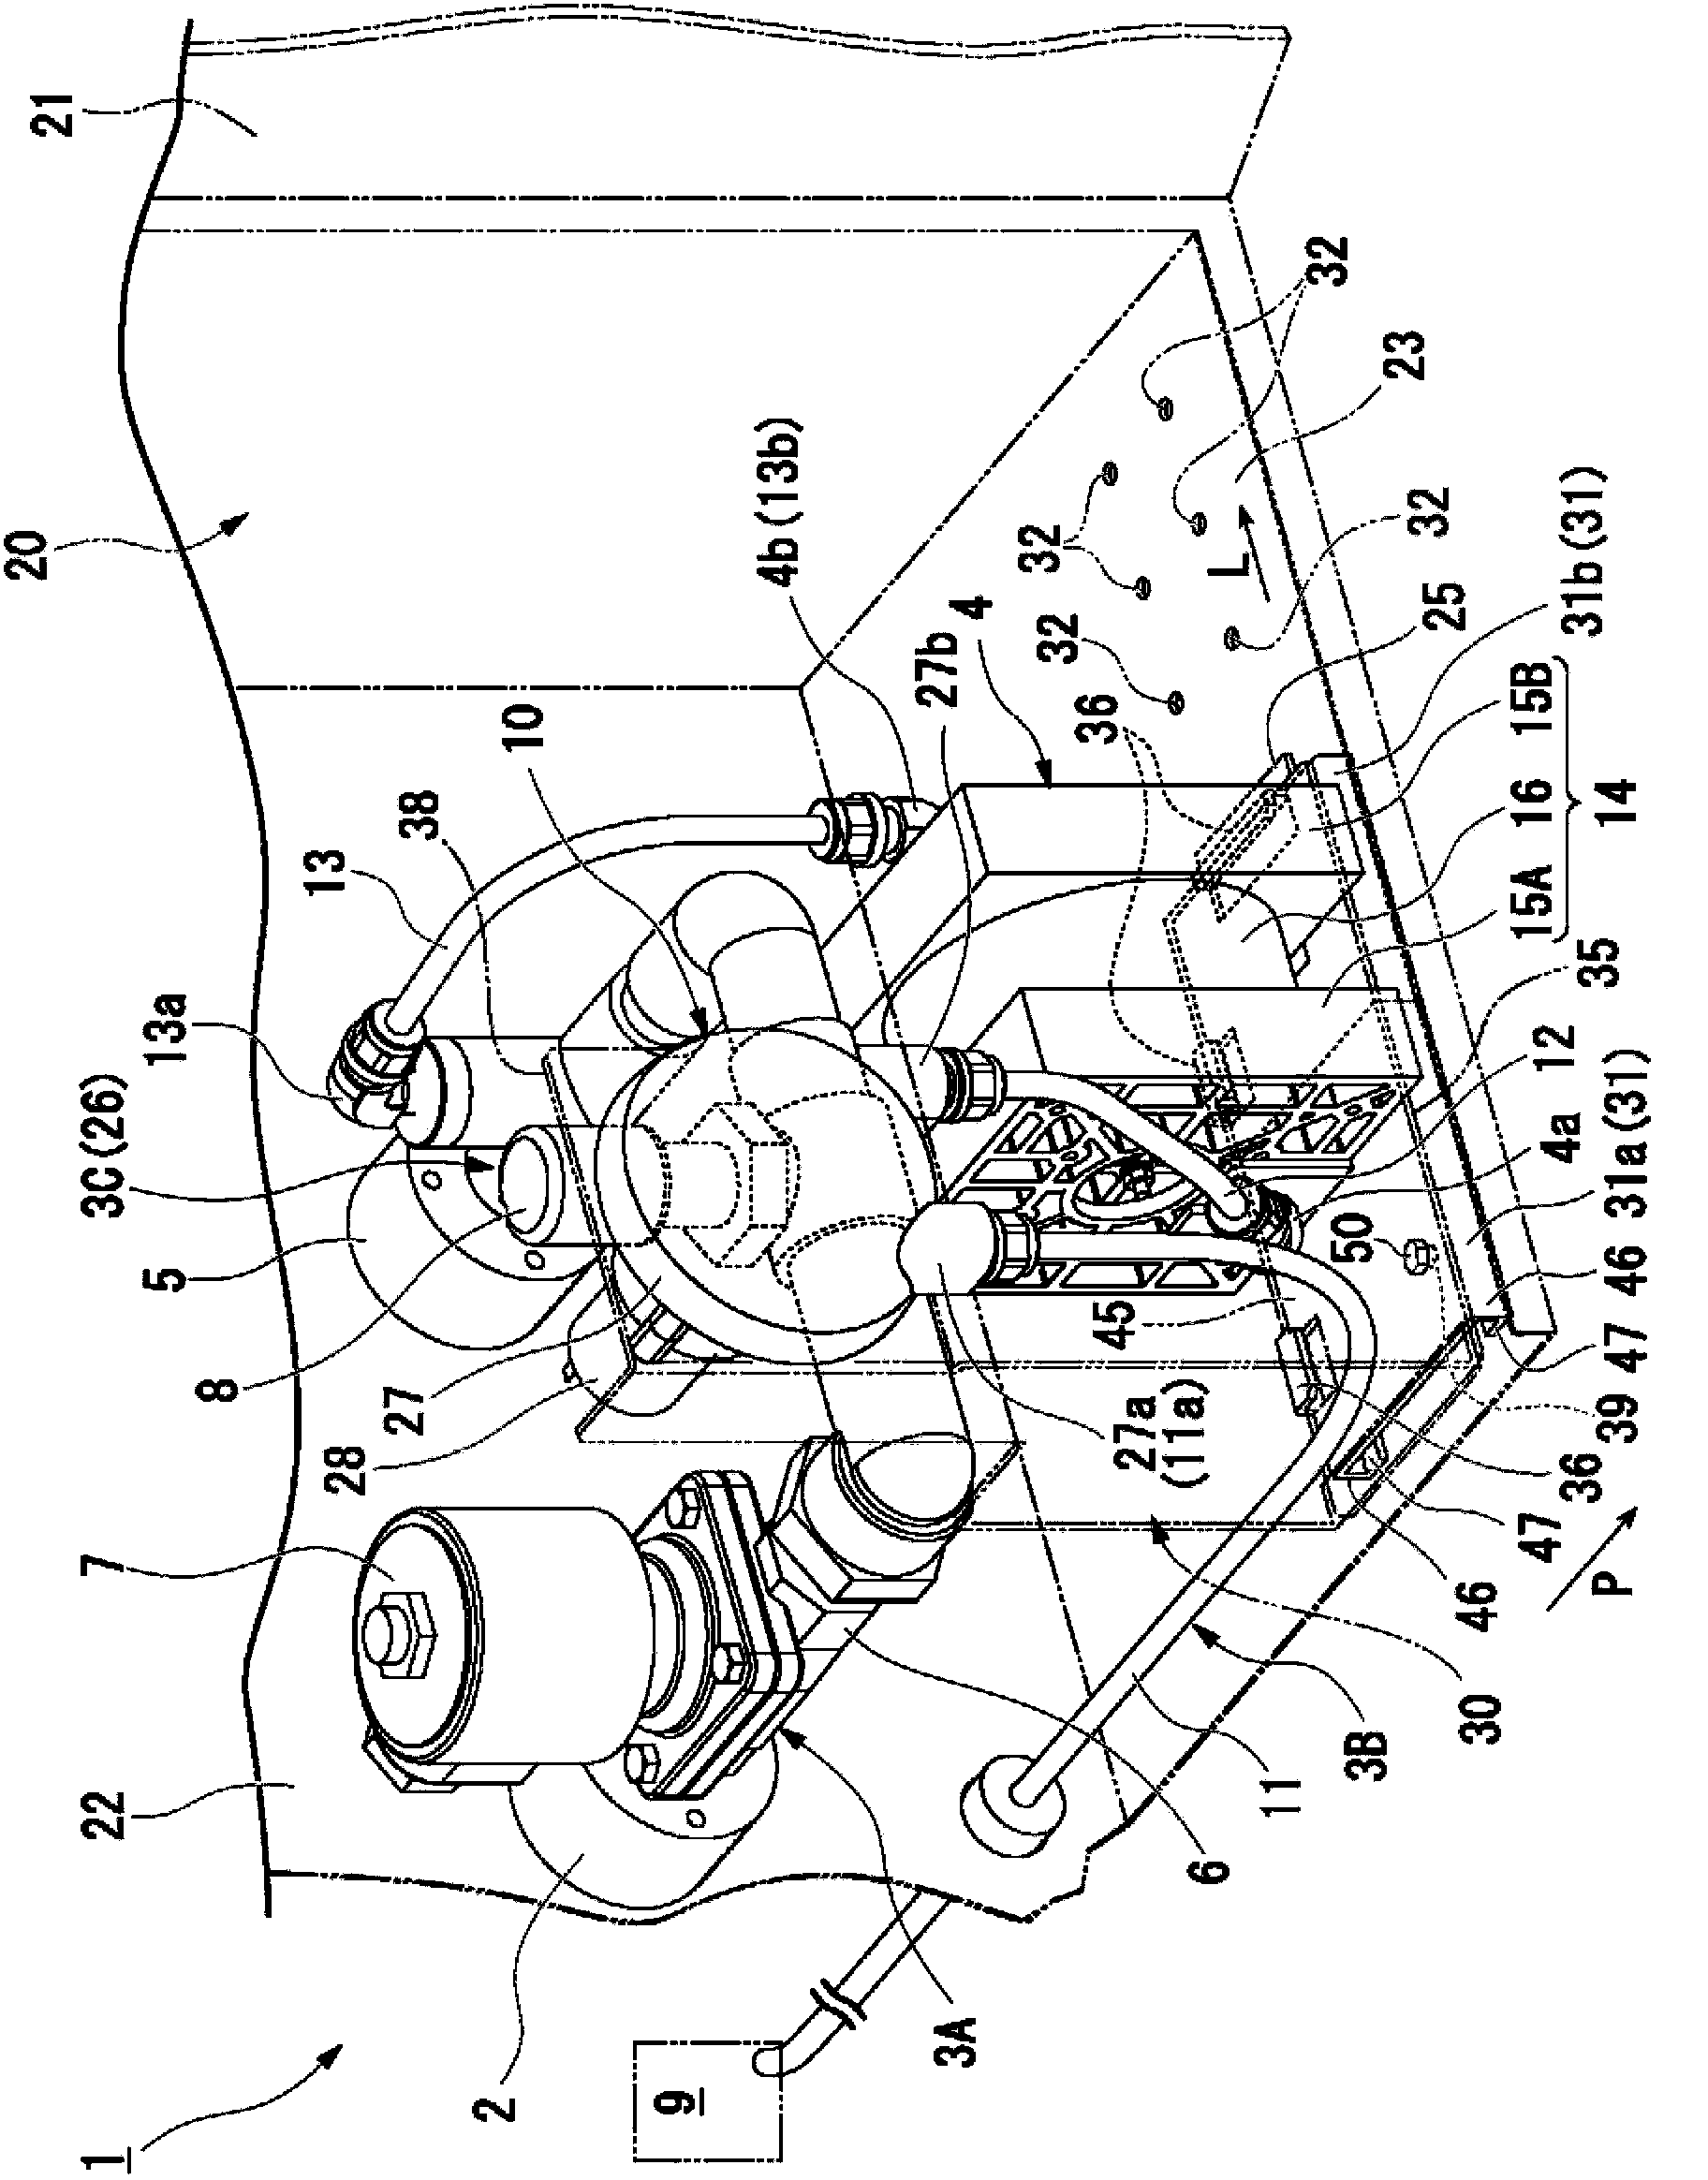 Electrolyzed water manufacturing device